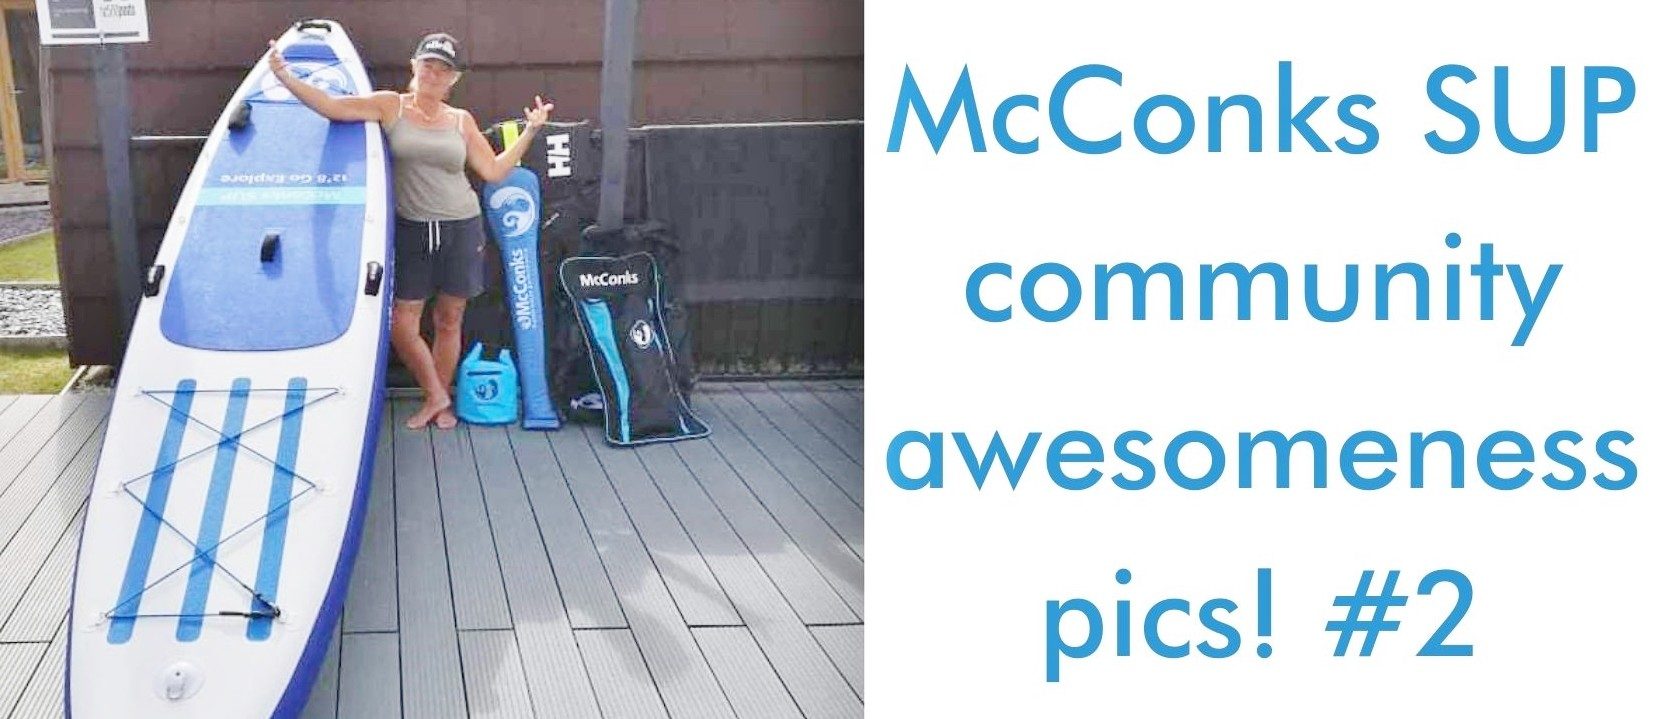 Read more about the article McConks SUP community awesomeness pics! #2